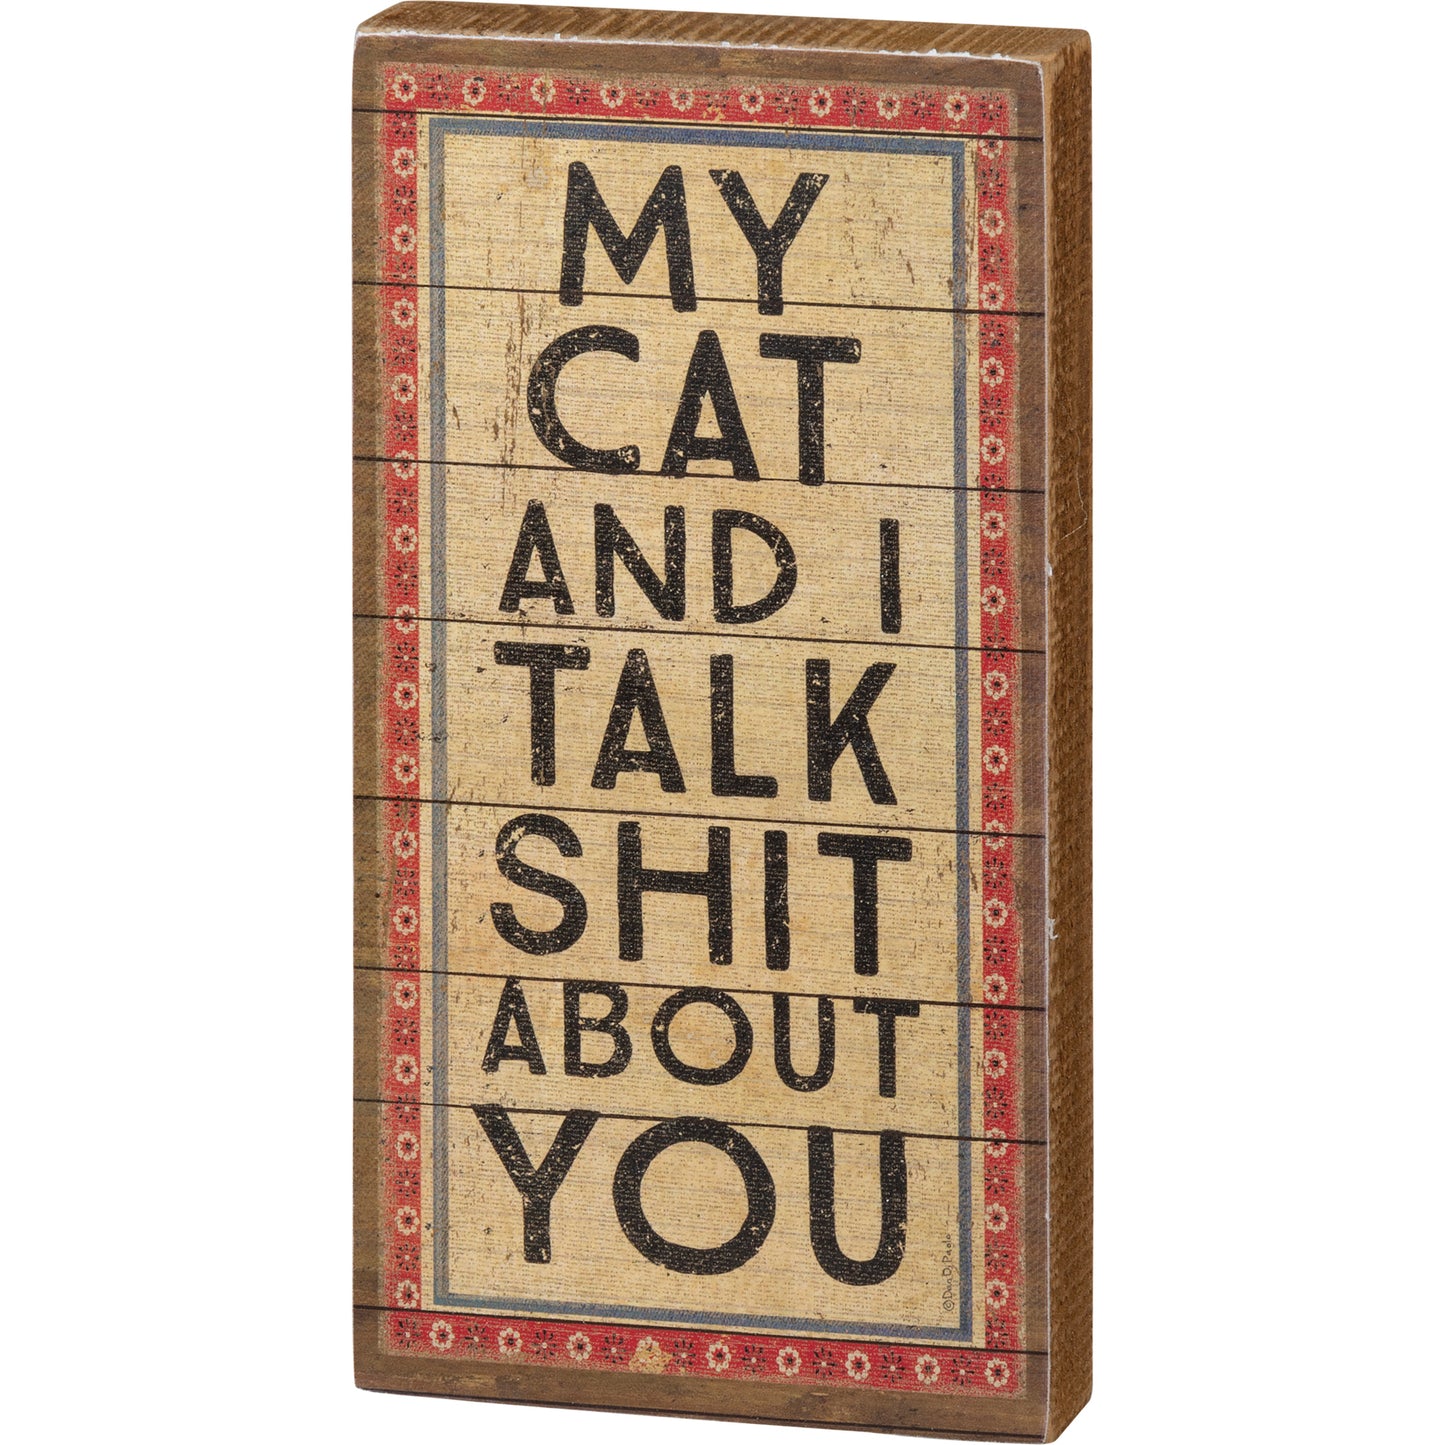 My Cat And I Talk About You Block Sign